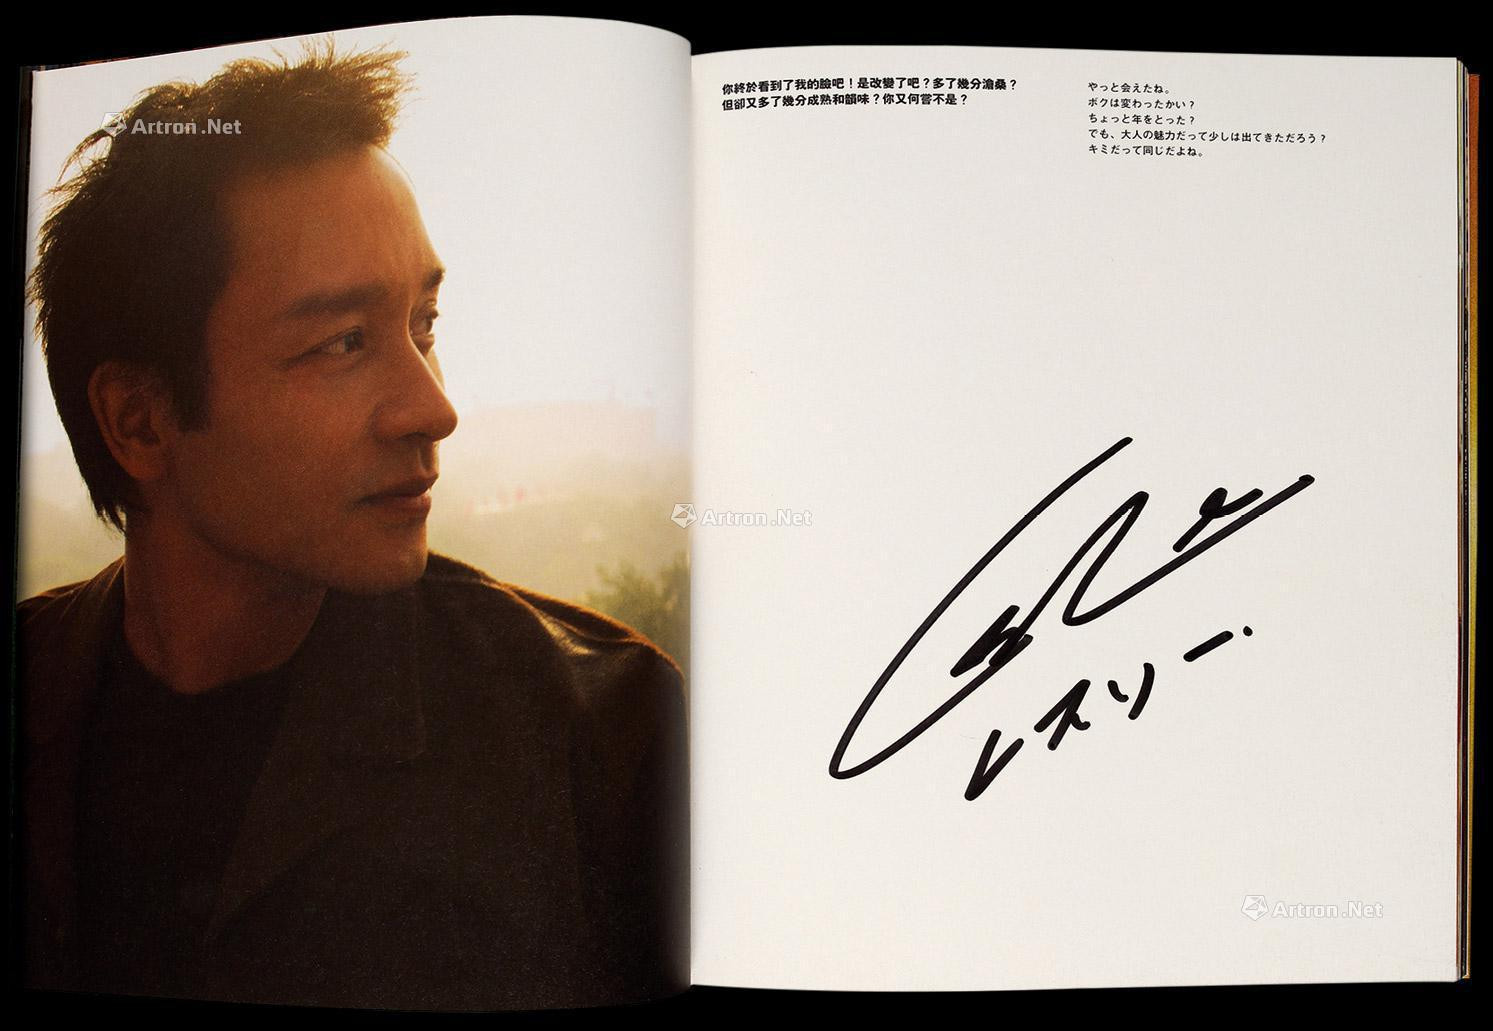 Signature album in Chinese and Japanese by Leslie cheung